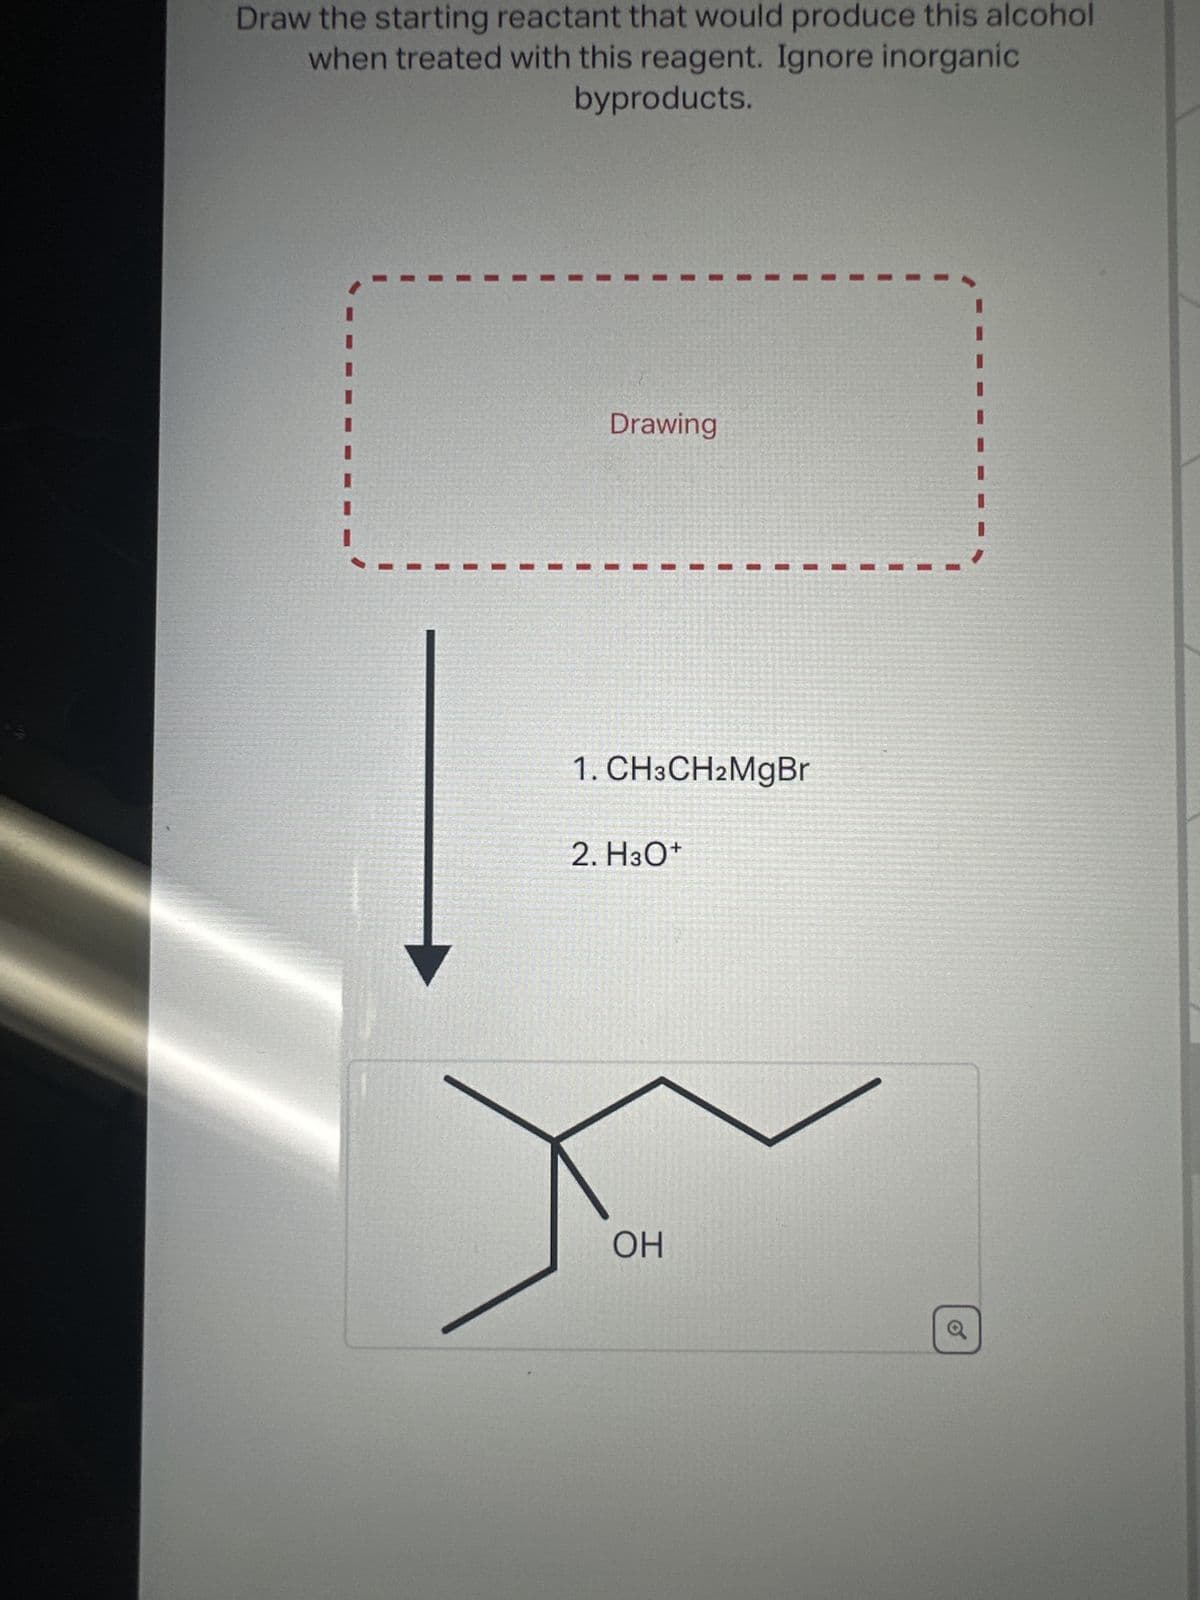 Draw the starting reactant that would produce this alcohol
when treated with this reagent. Ignore inorganic
byproducts.
Drawing
1. CH3CH2MgBr
2. H3O+
OH